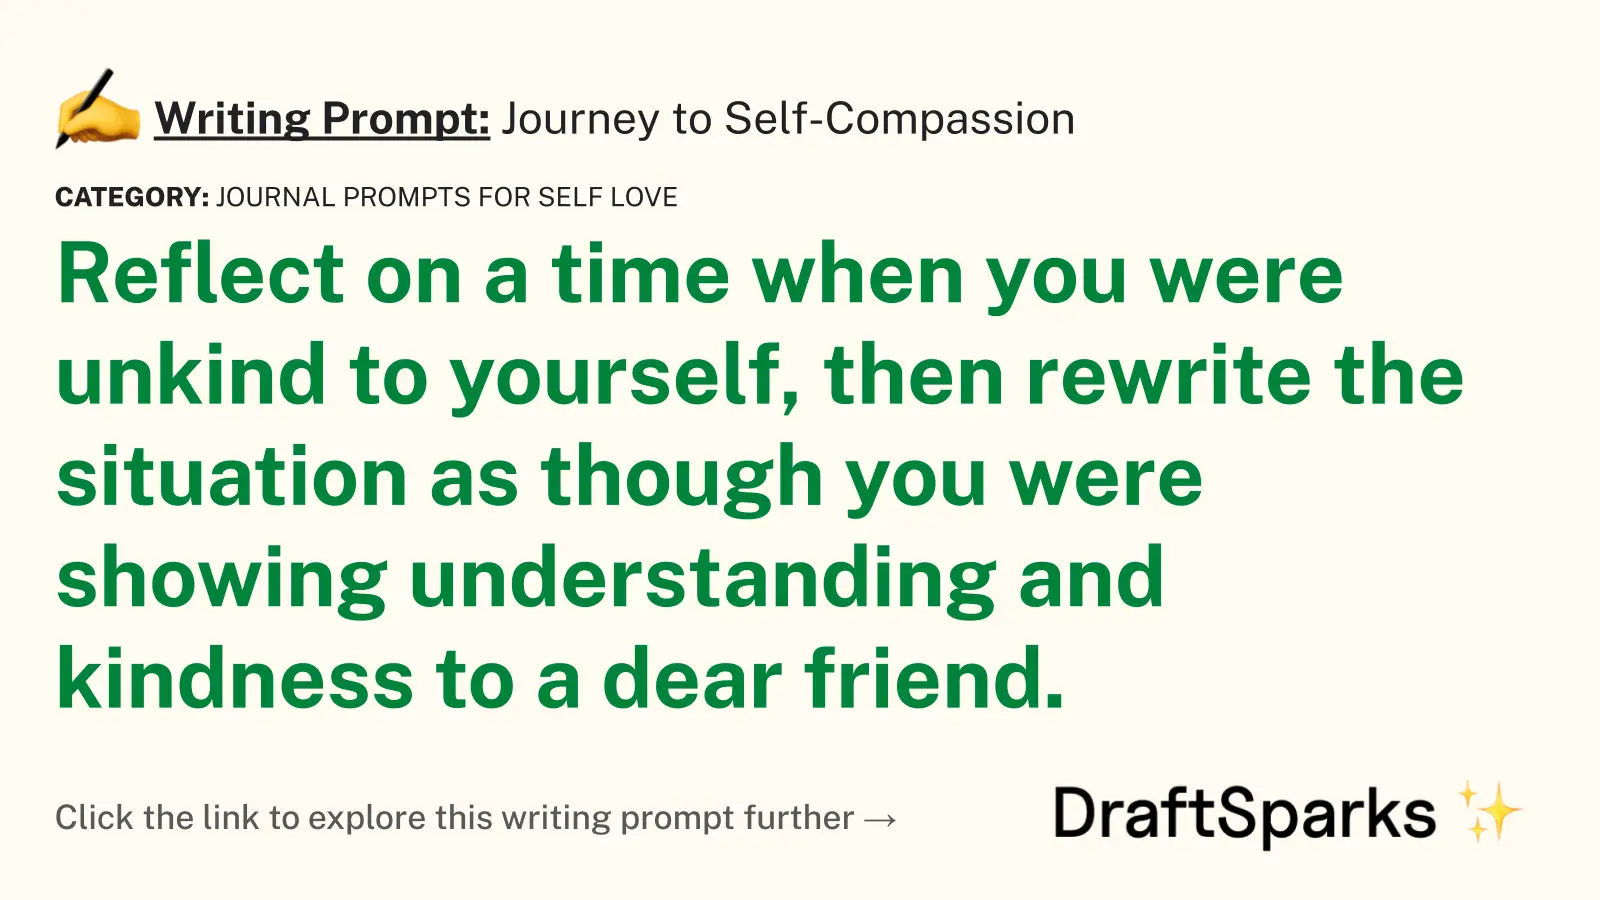 Journey to Self-Compassion